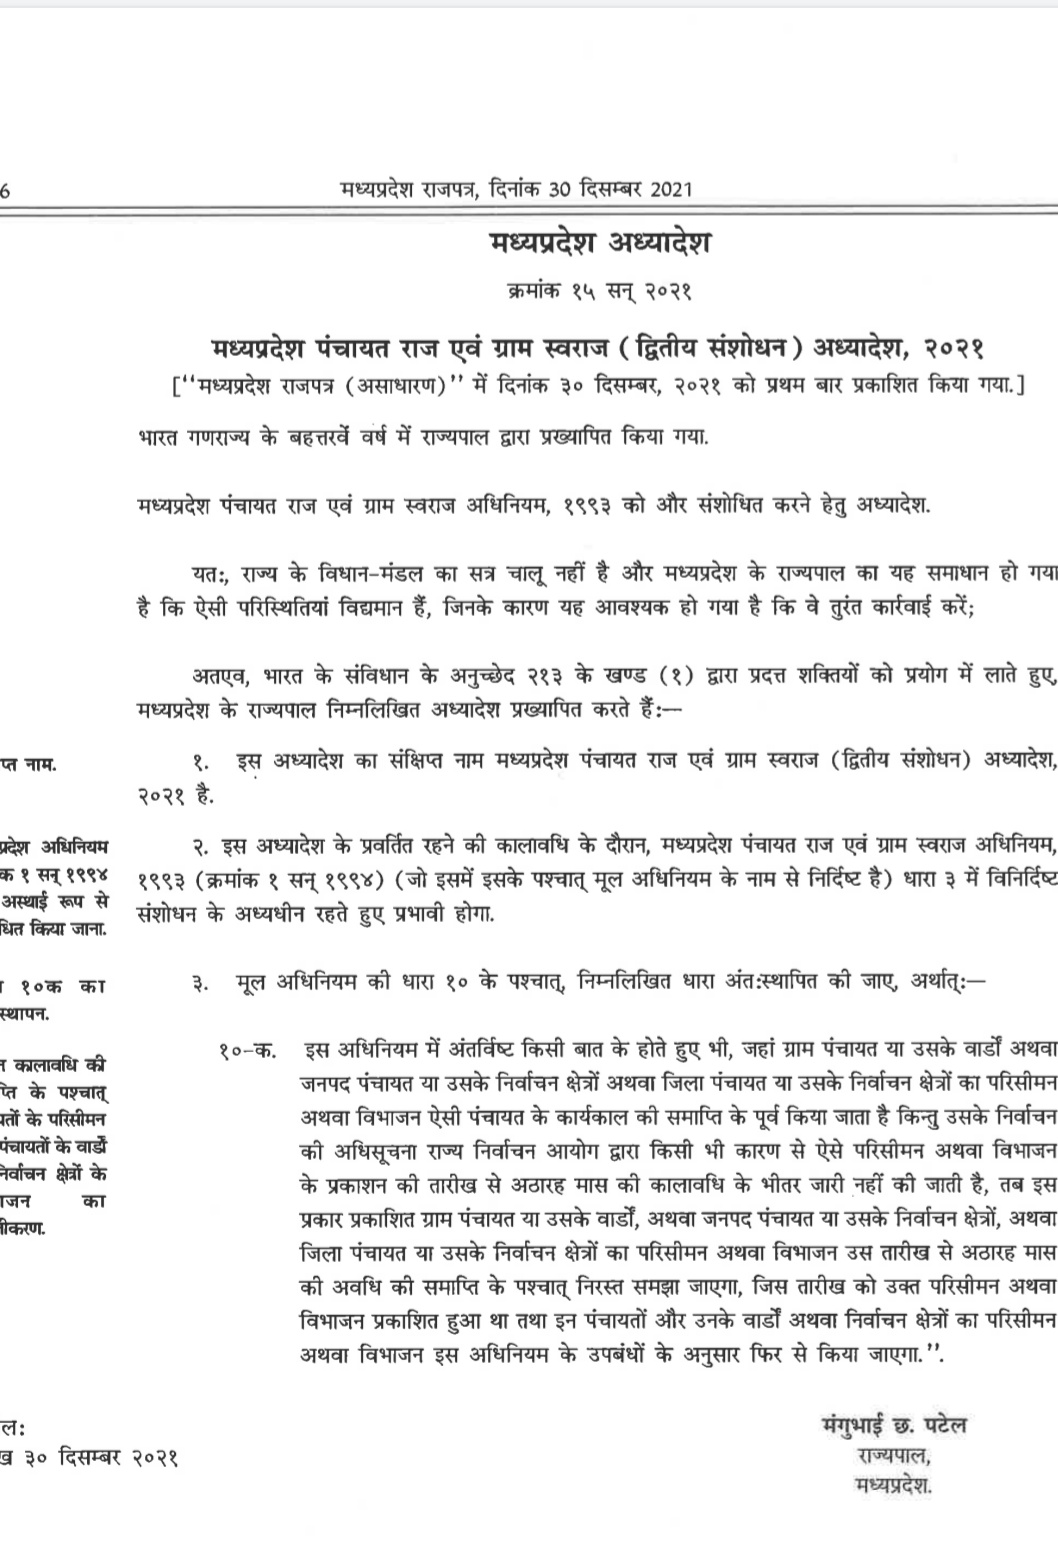 There will be new delimitation of panchayats in MP